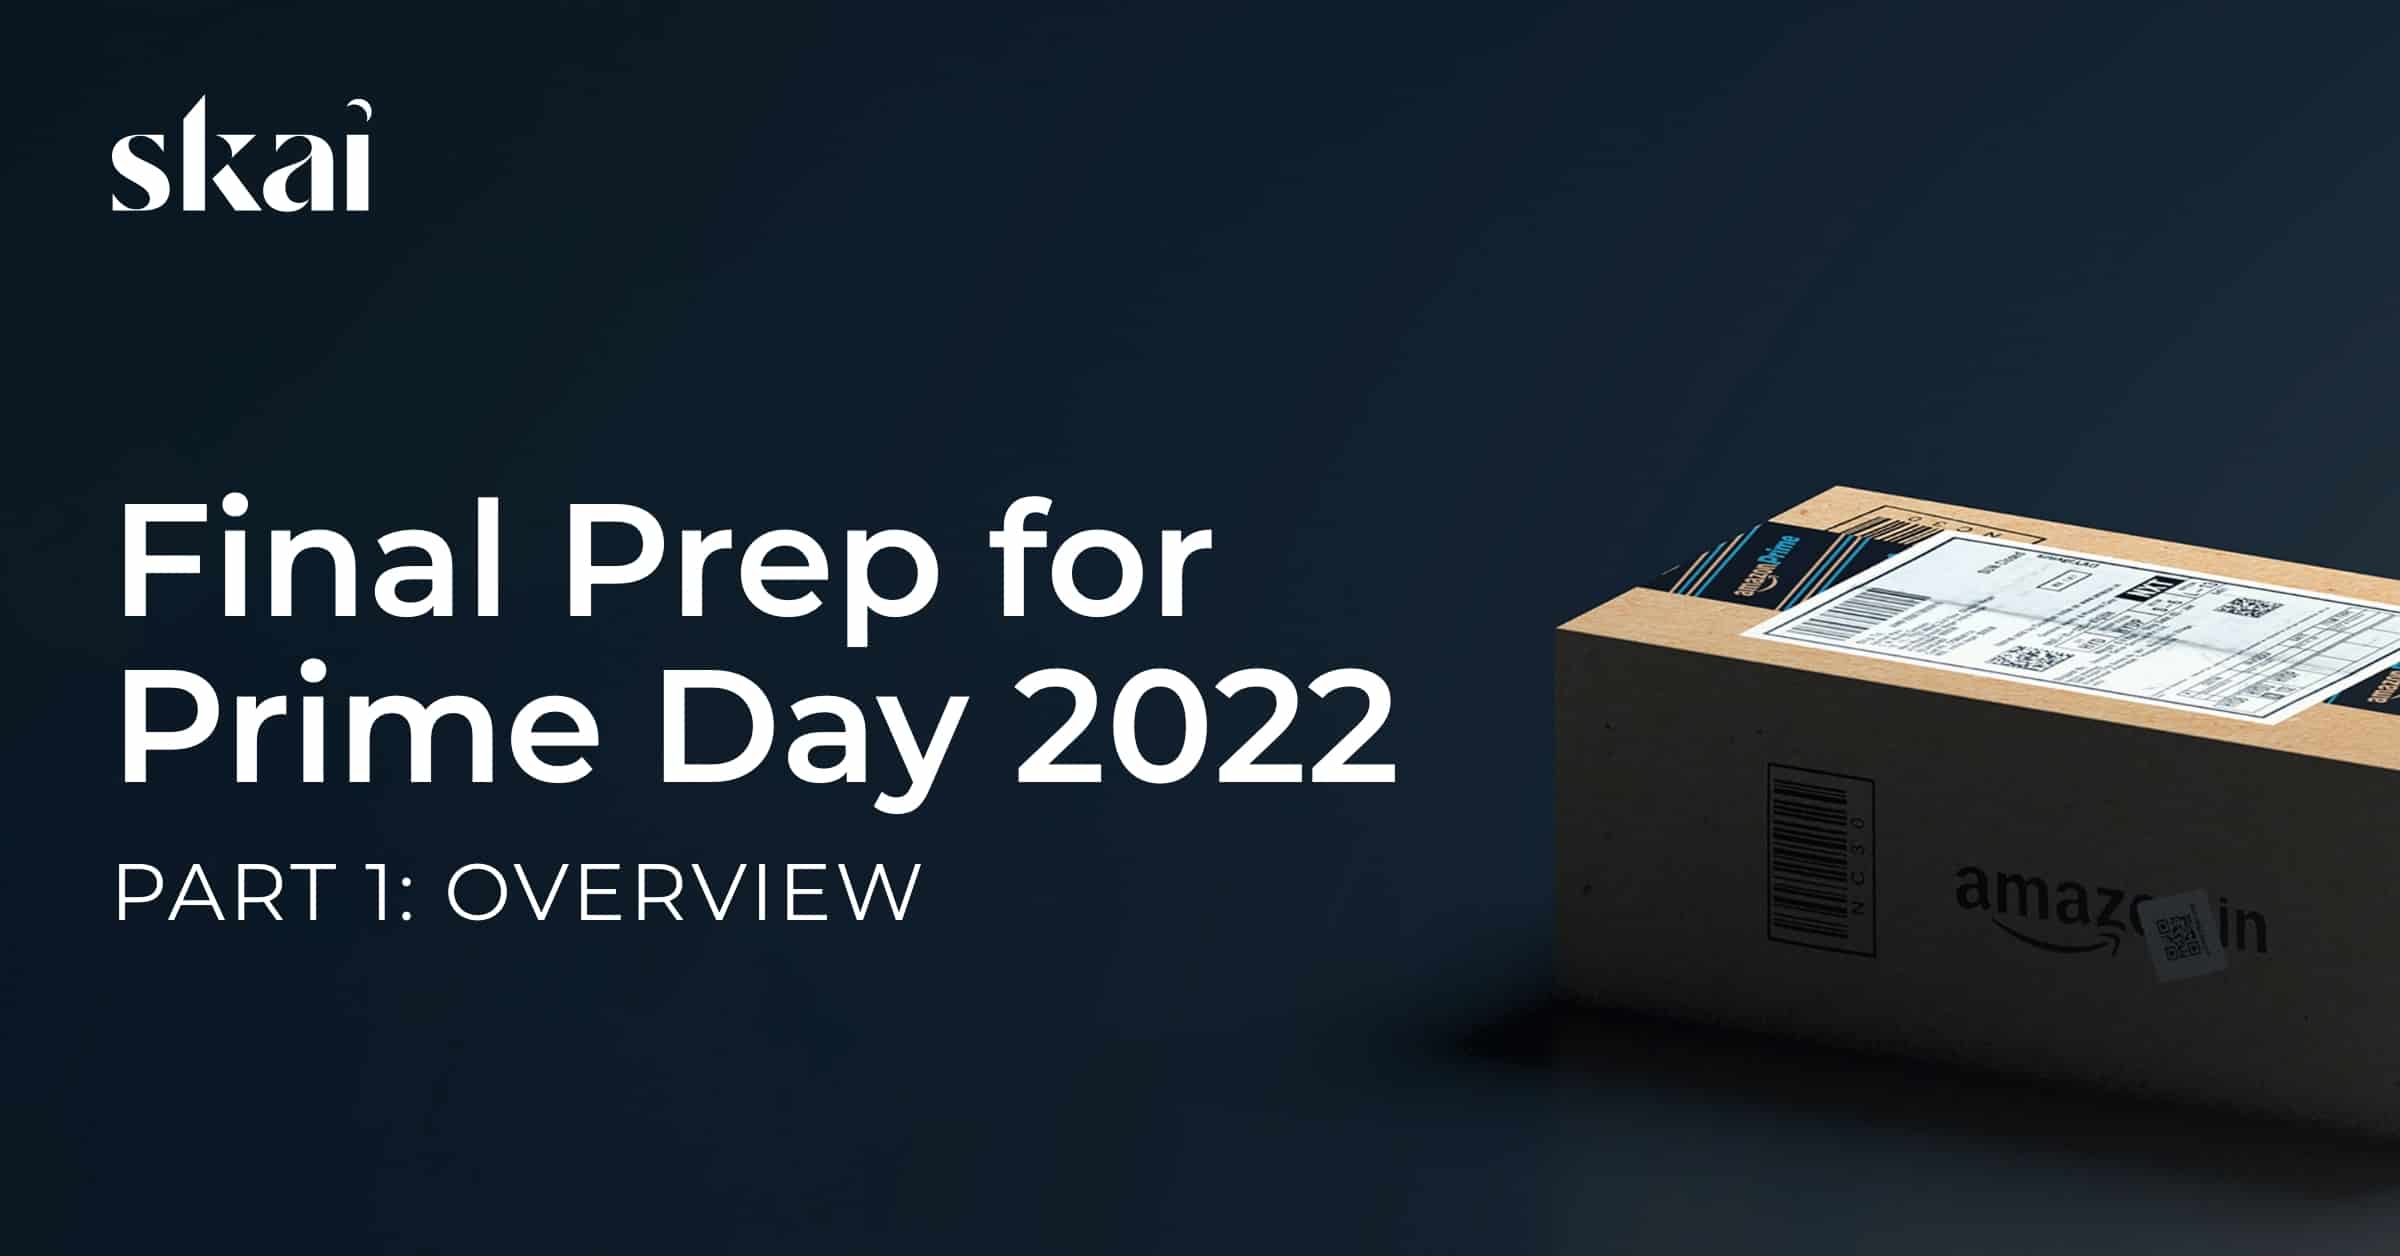 Final Prep for Prime Day 2022: Part 1 - Overview